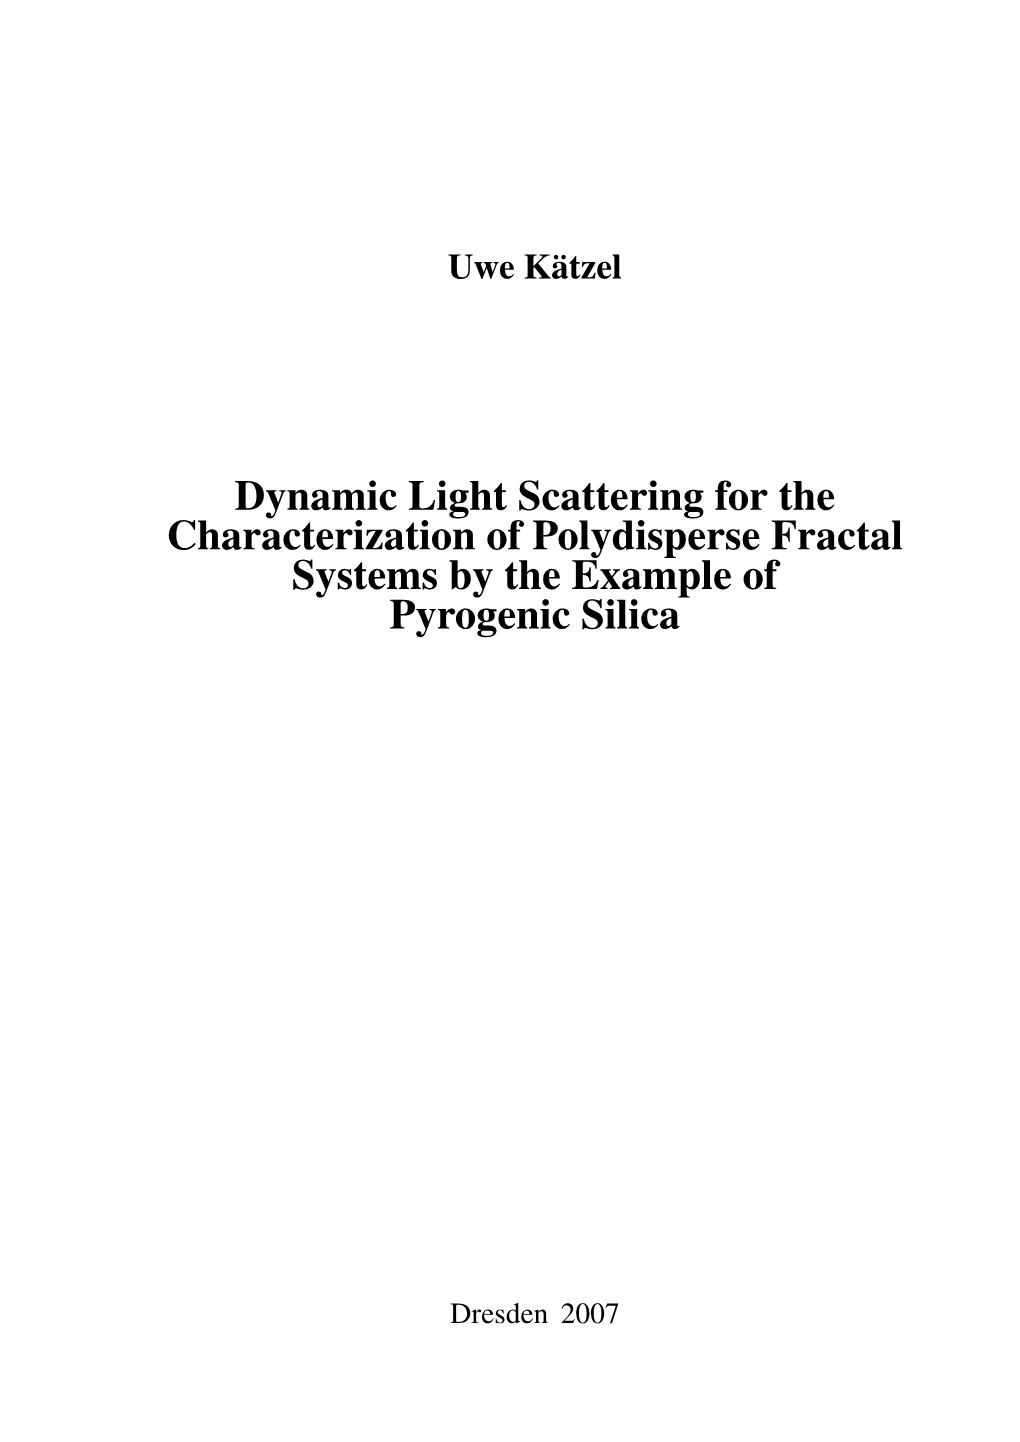 Dynamic Light Scattering for the Characterization of Polydisperse Fractal Systems by the Example of Pyrogenic Silica